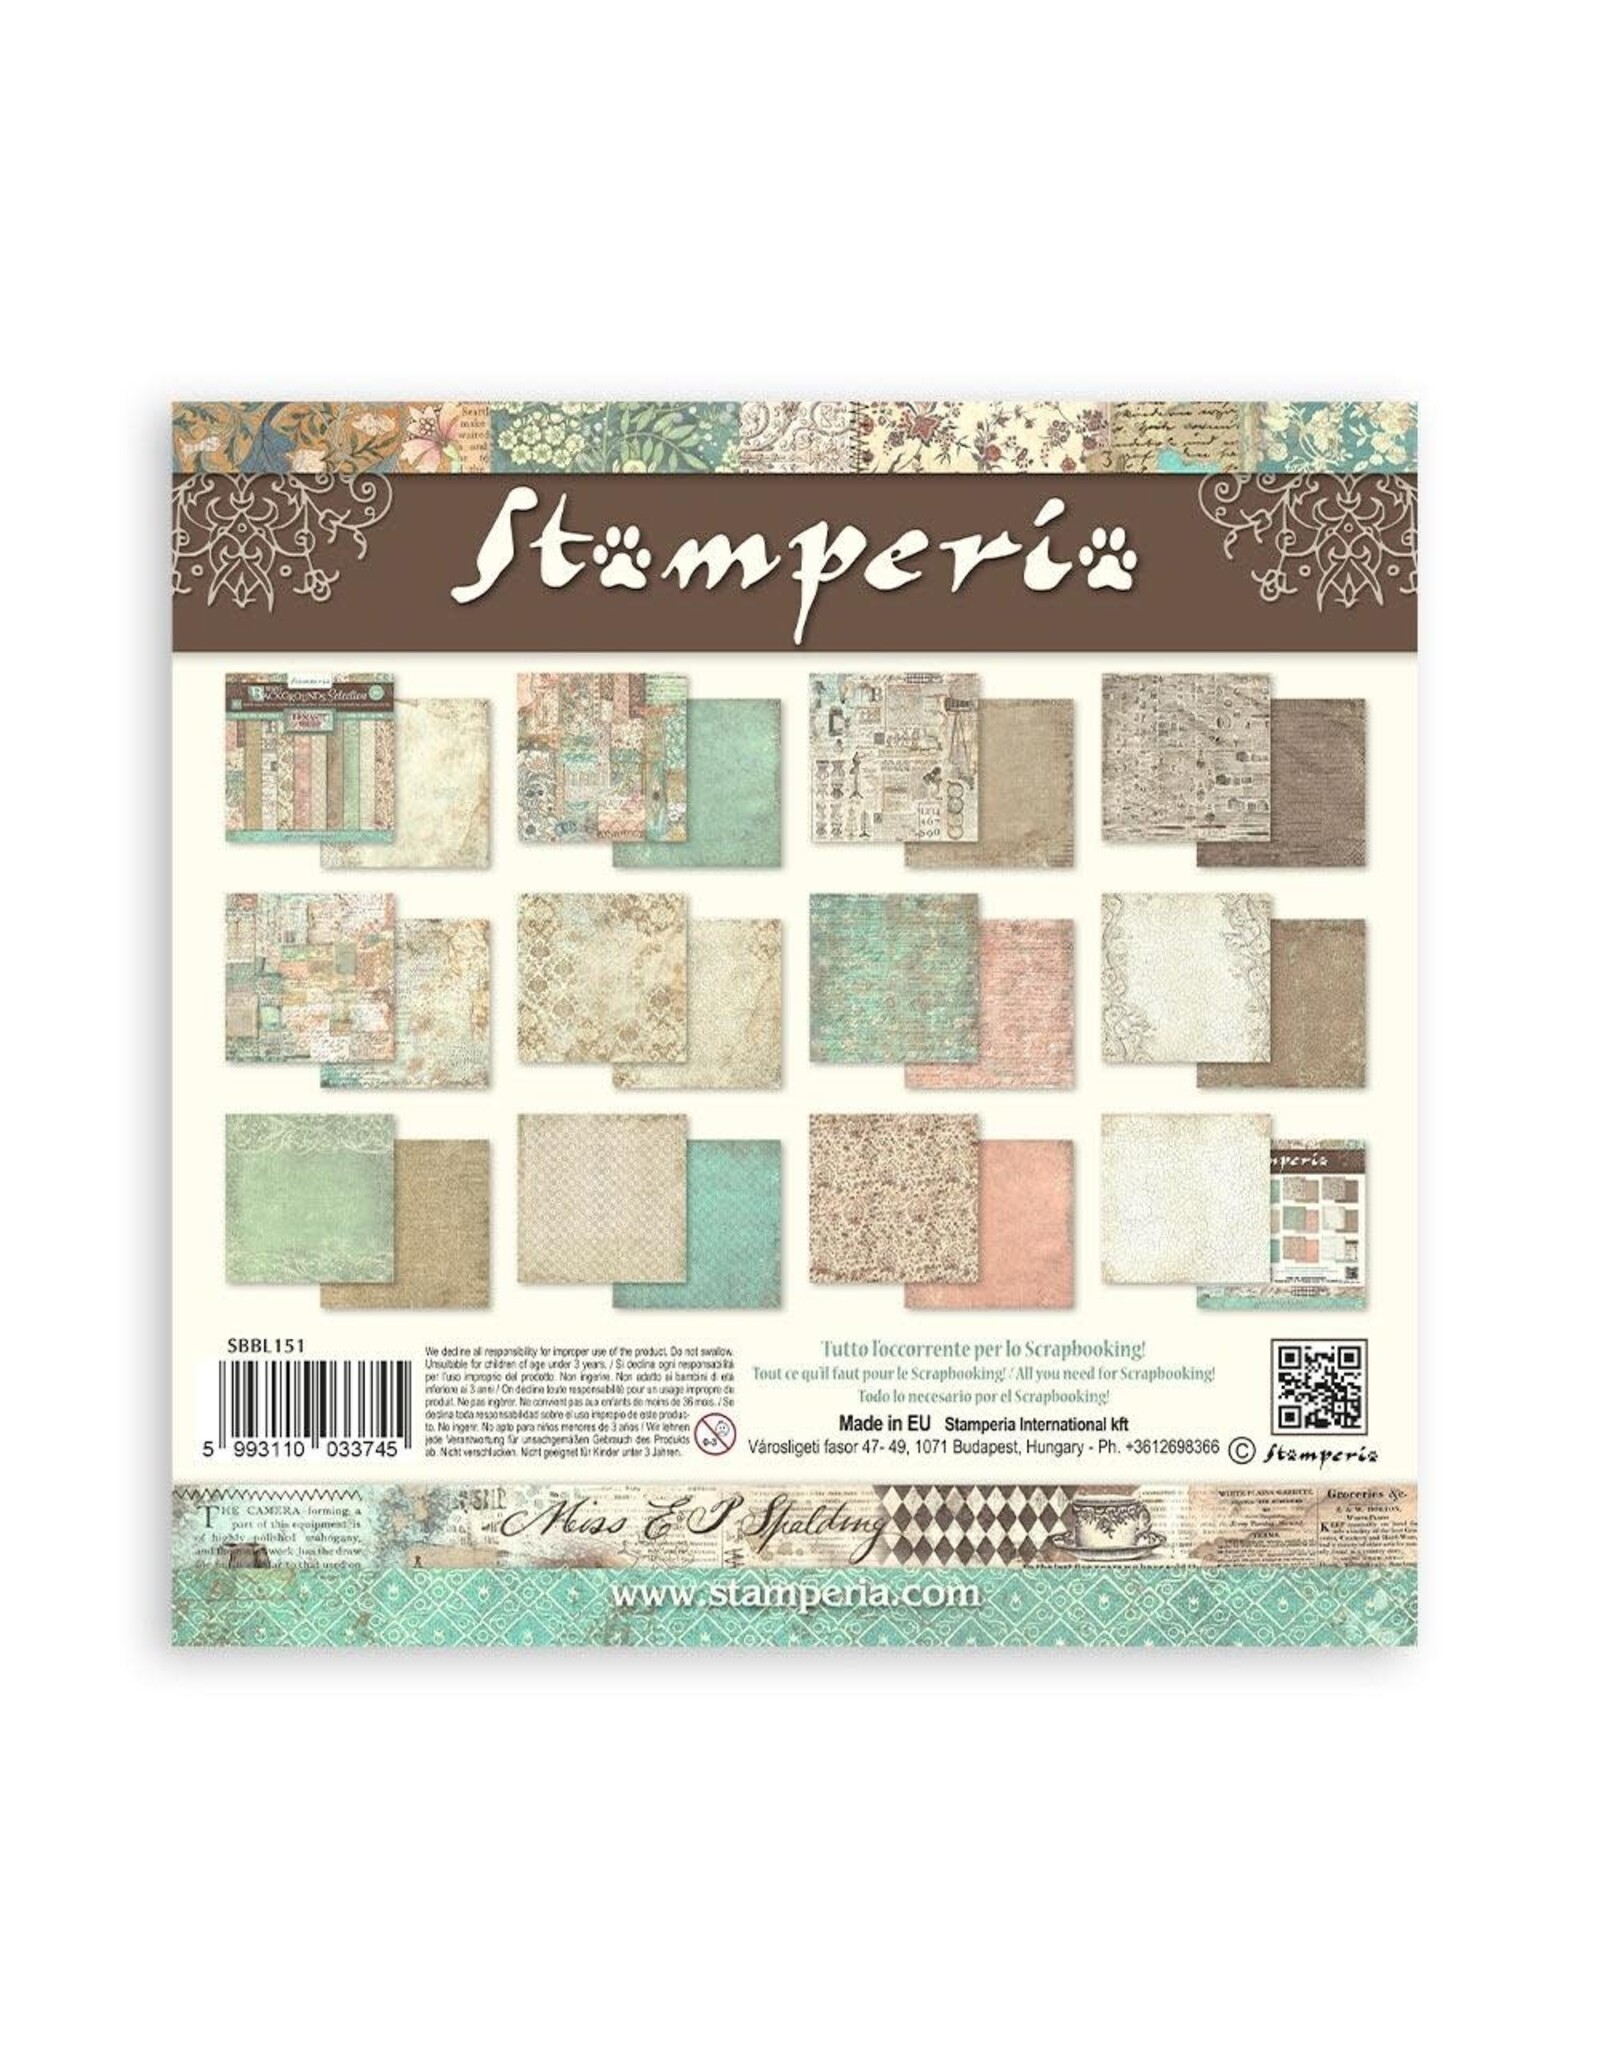 Stamperia Brocante Antiques Maxi Backgrounds 12X12 Paper Pad